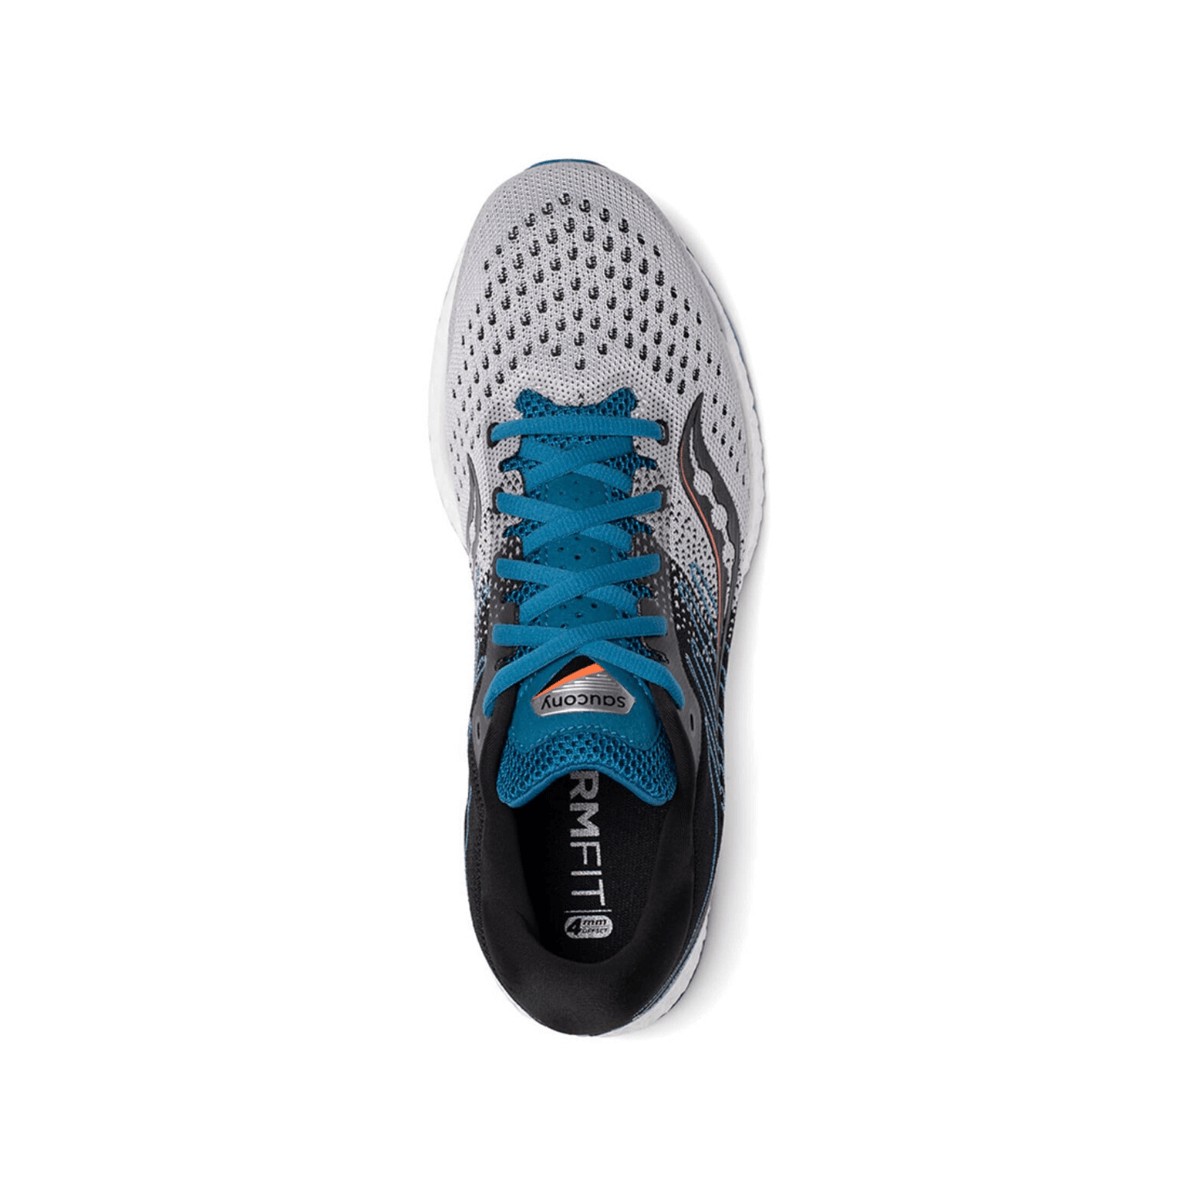 saucony freedom iso hombre gris